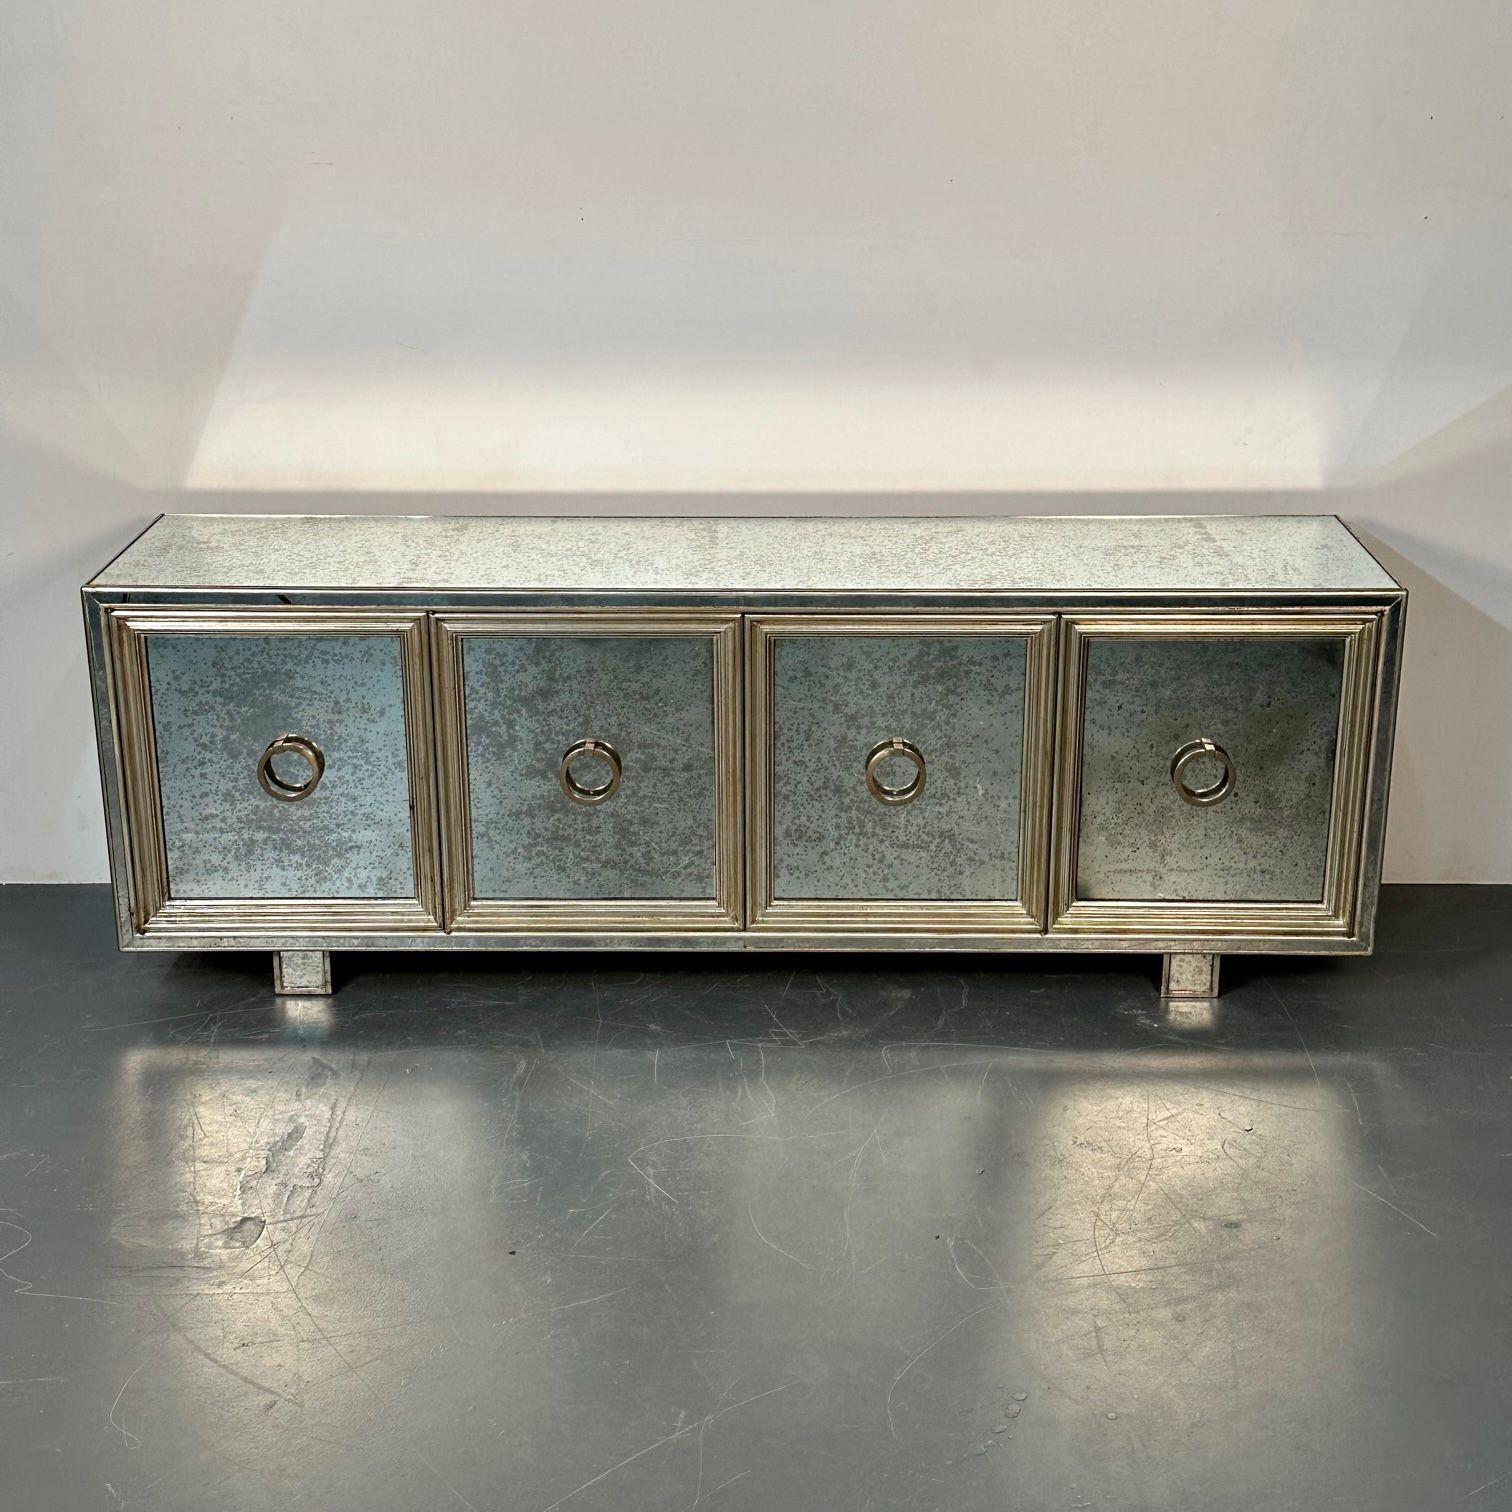 Hollywood Regency, Sideboard, Distressed Mirror, Silver Gilt, USA, 2000s

Four mirrored front doors hiding a set of ebony shelved interiors. The case itself is absolutely spectacular with mirrored cube feet supporting a large and impressive cabinet